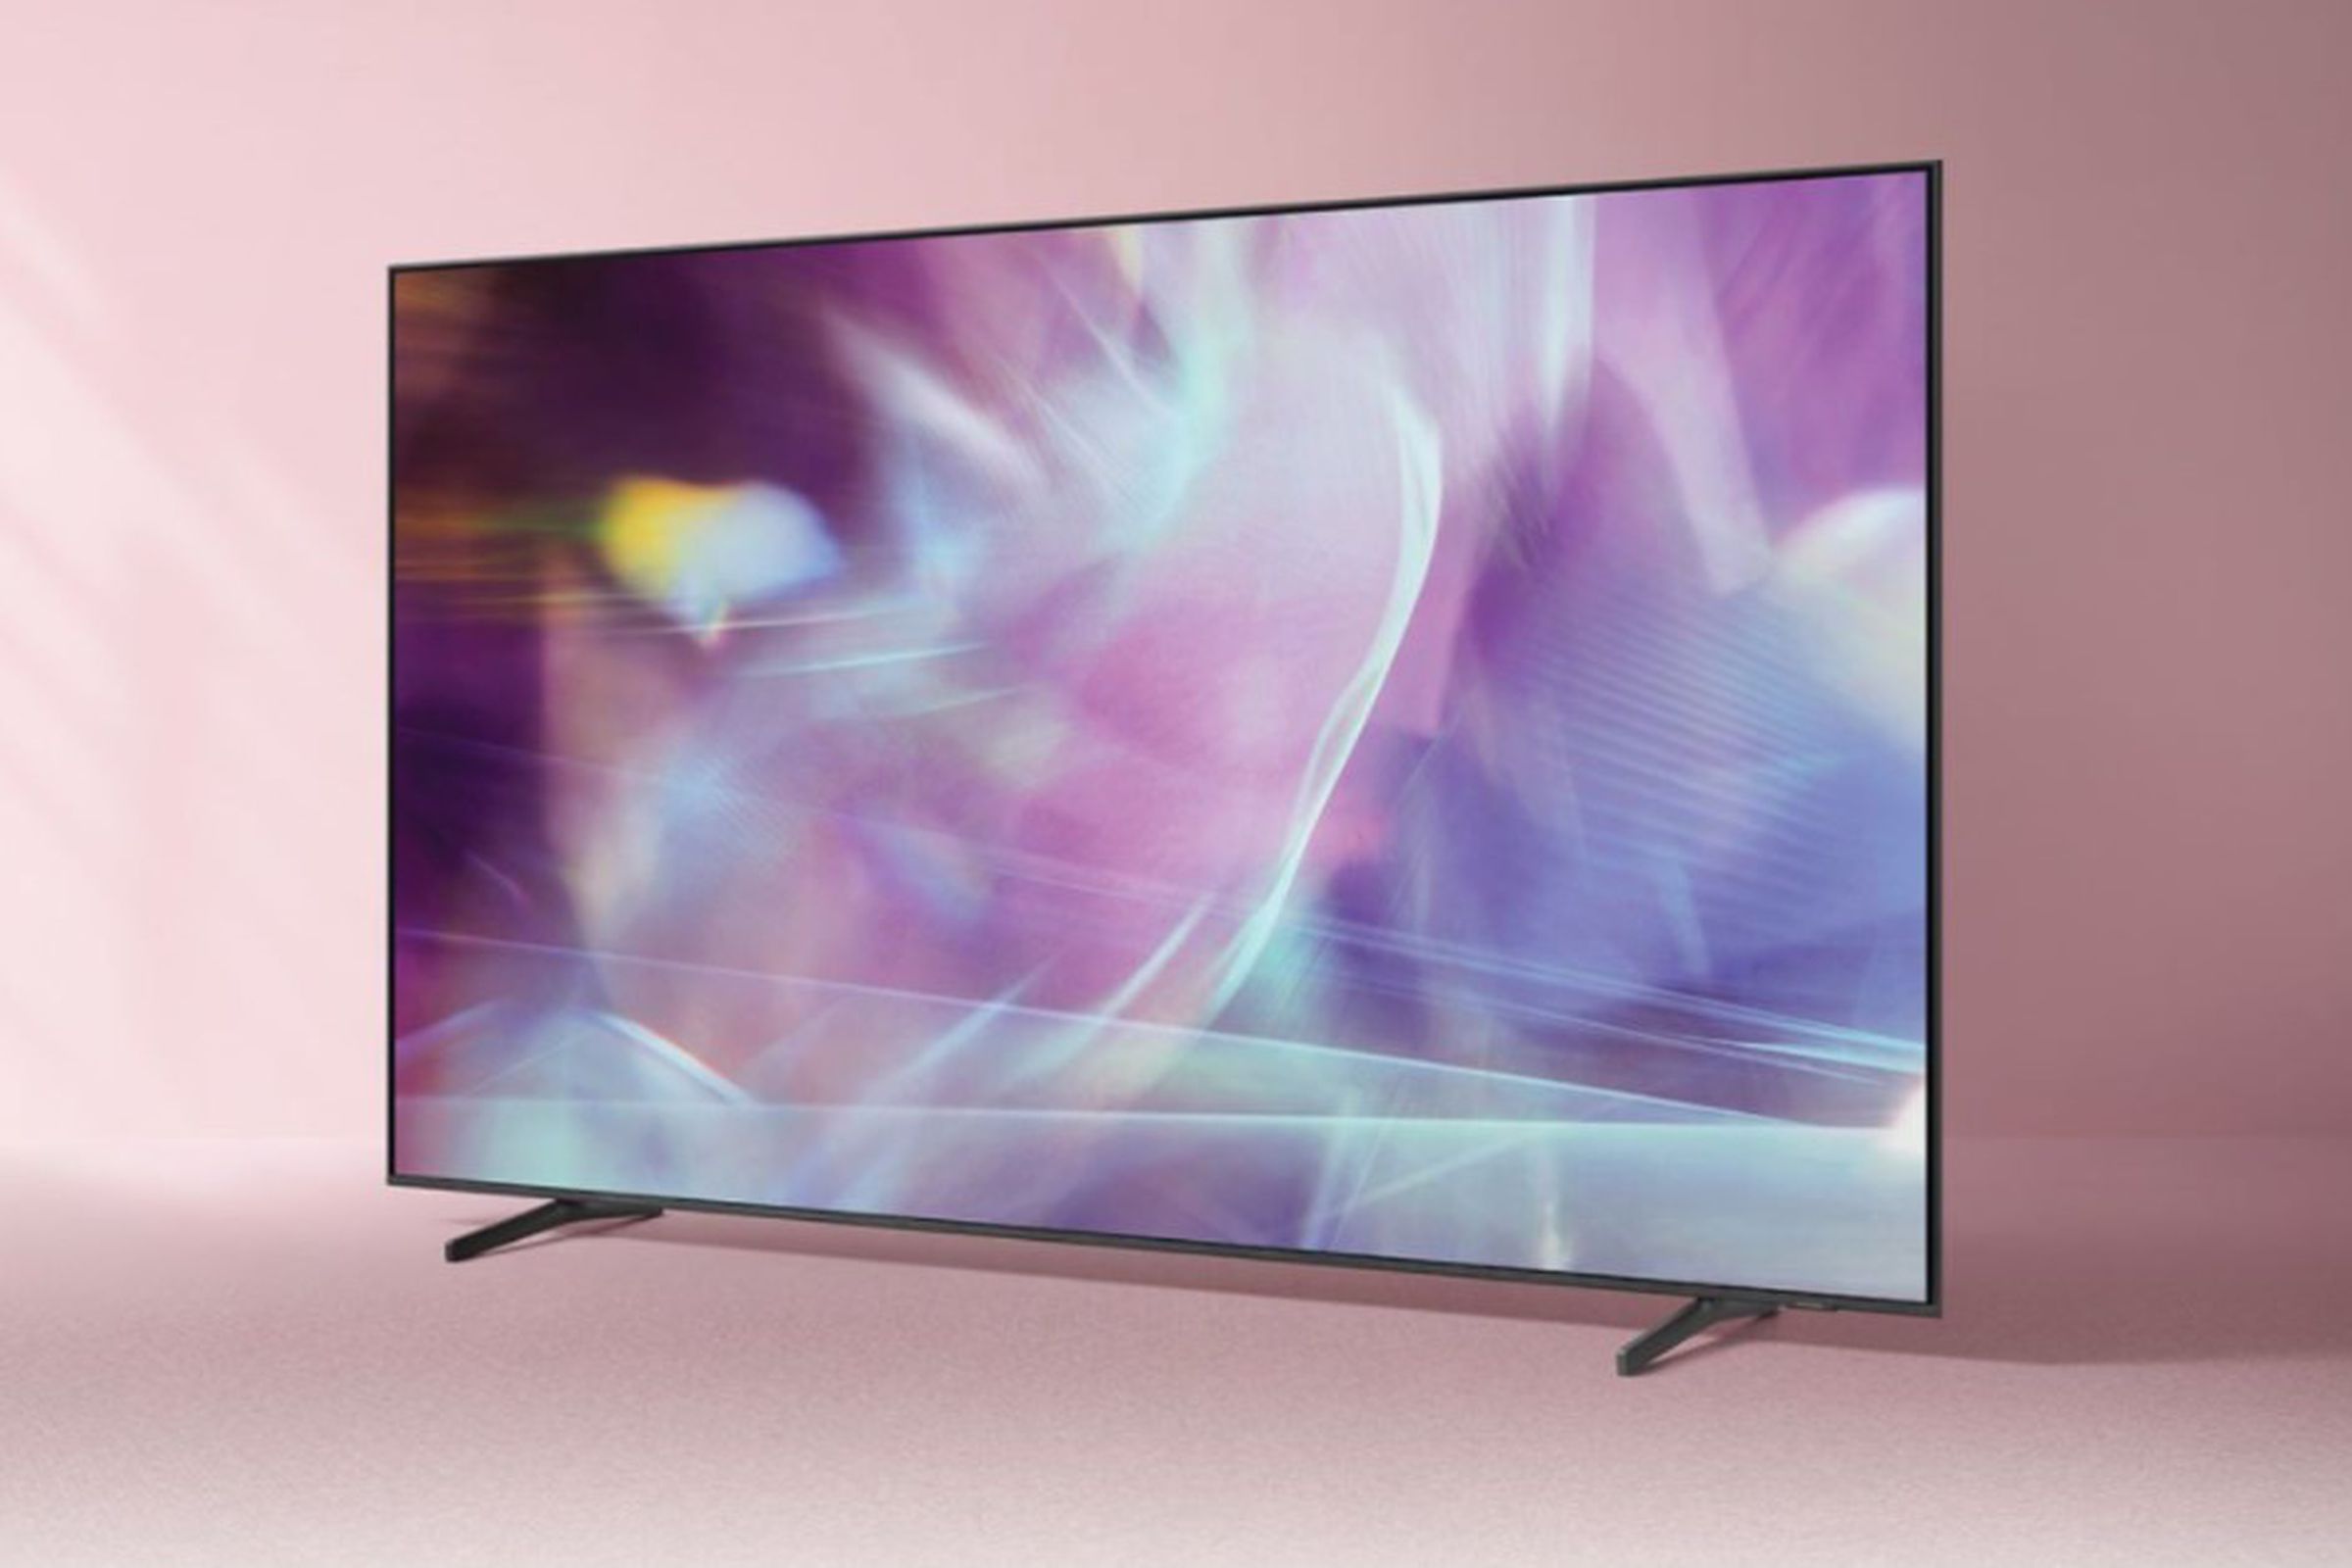 The best TVs on Sale over Black Friday weekend